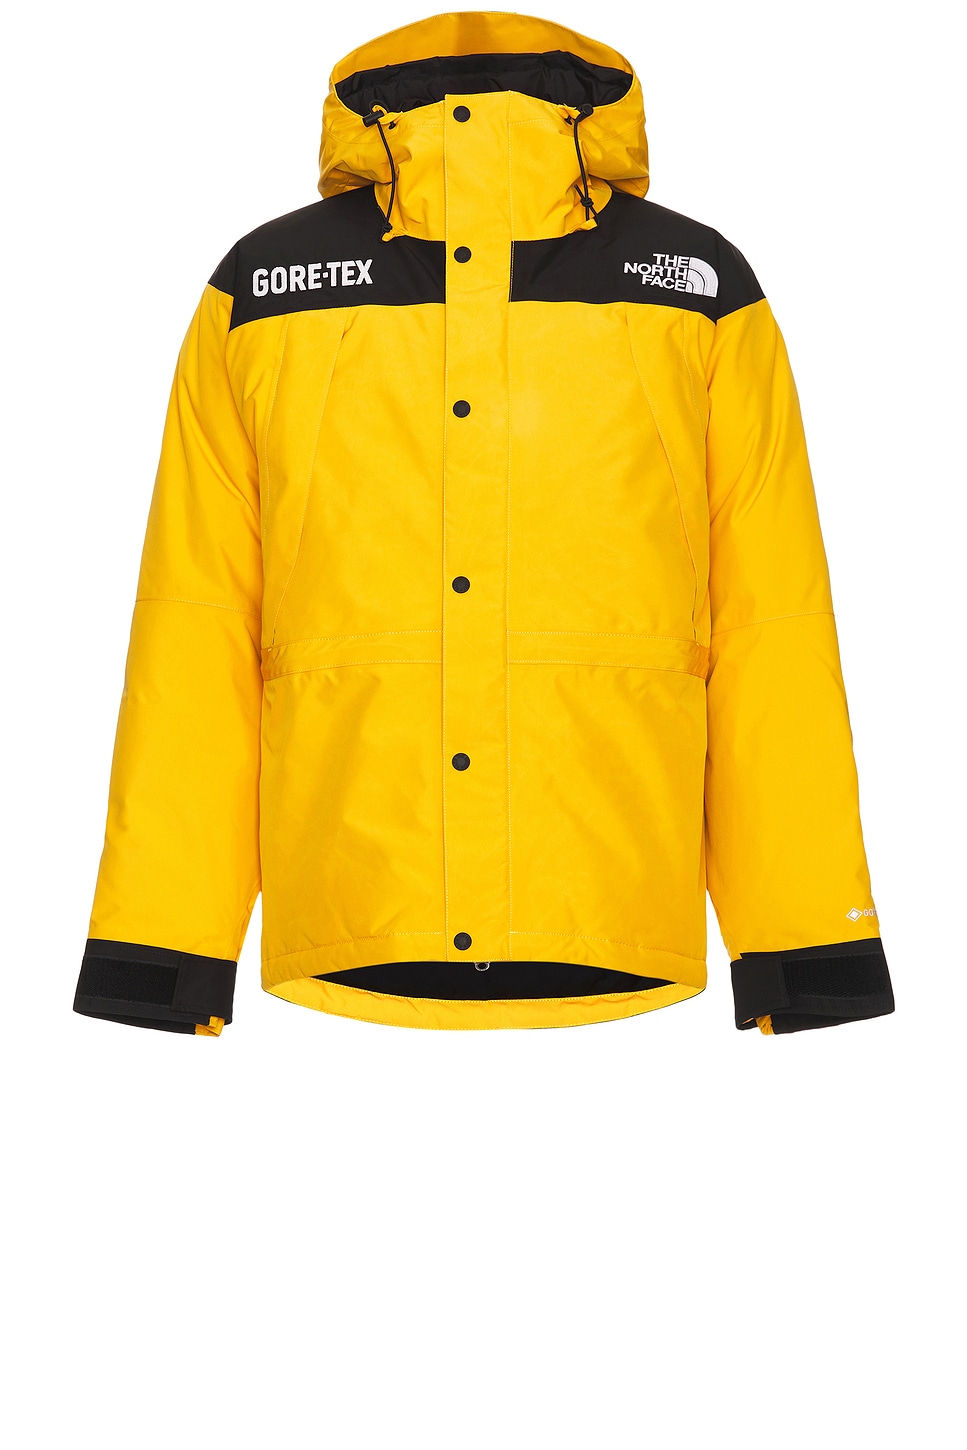 Image 1 of The North Face S Gtx Mountain Guide Insulated Jacket in Summit Gold & Tnf Black